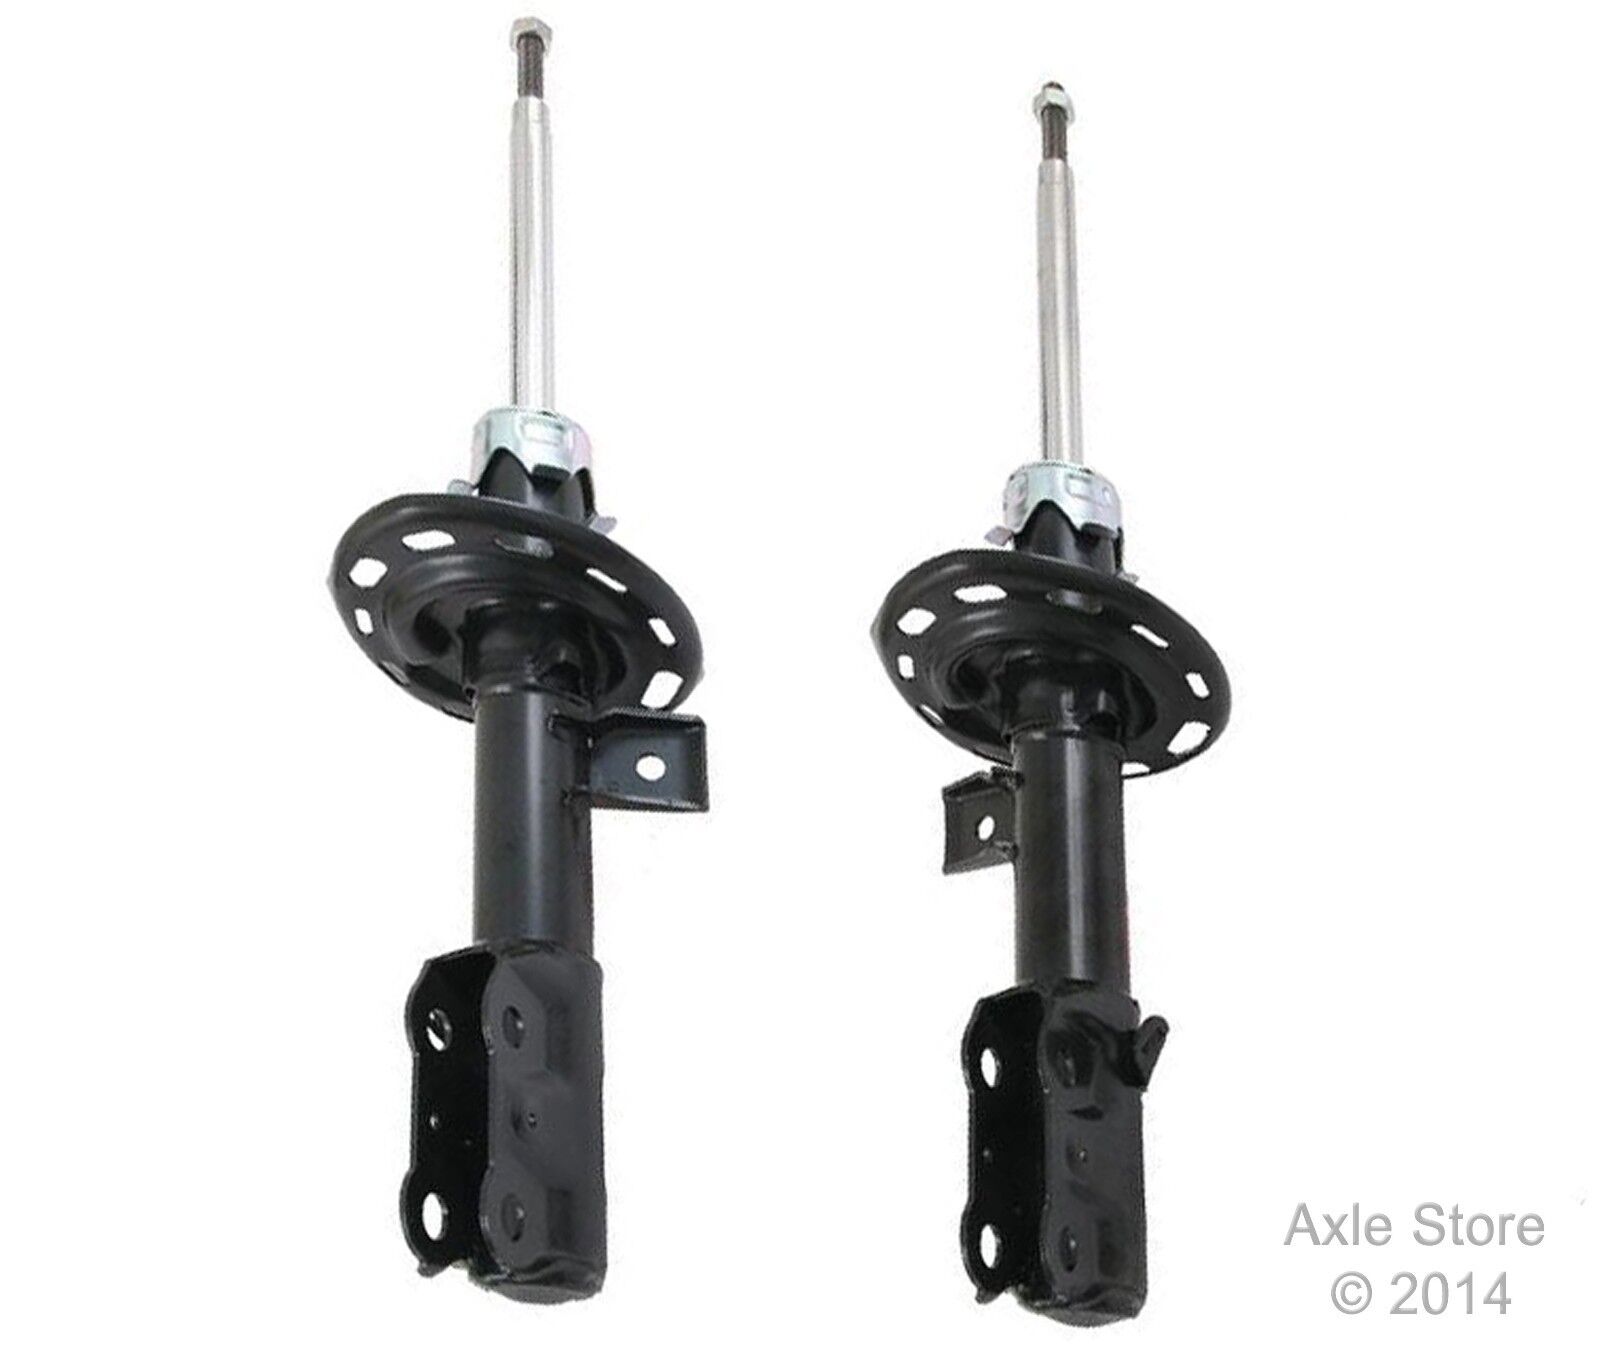 2 New Front Suspension Shocks Struts for 2007 2008 Honda Fit with Warranty